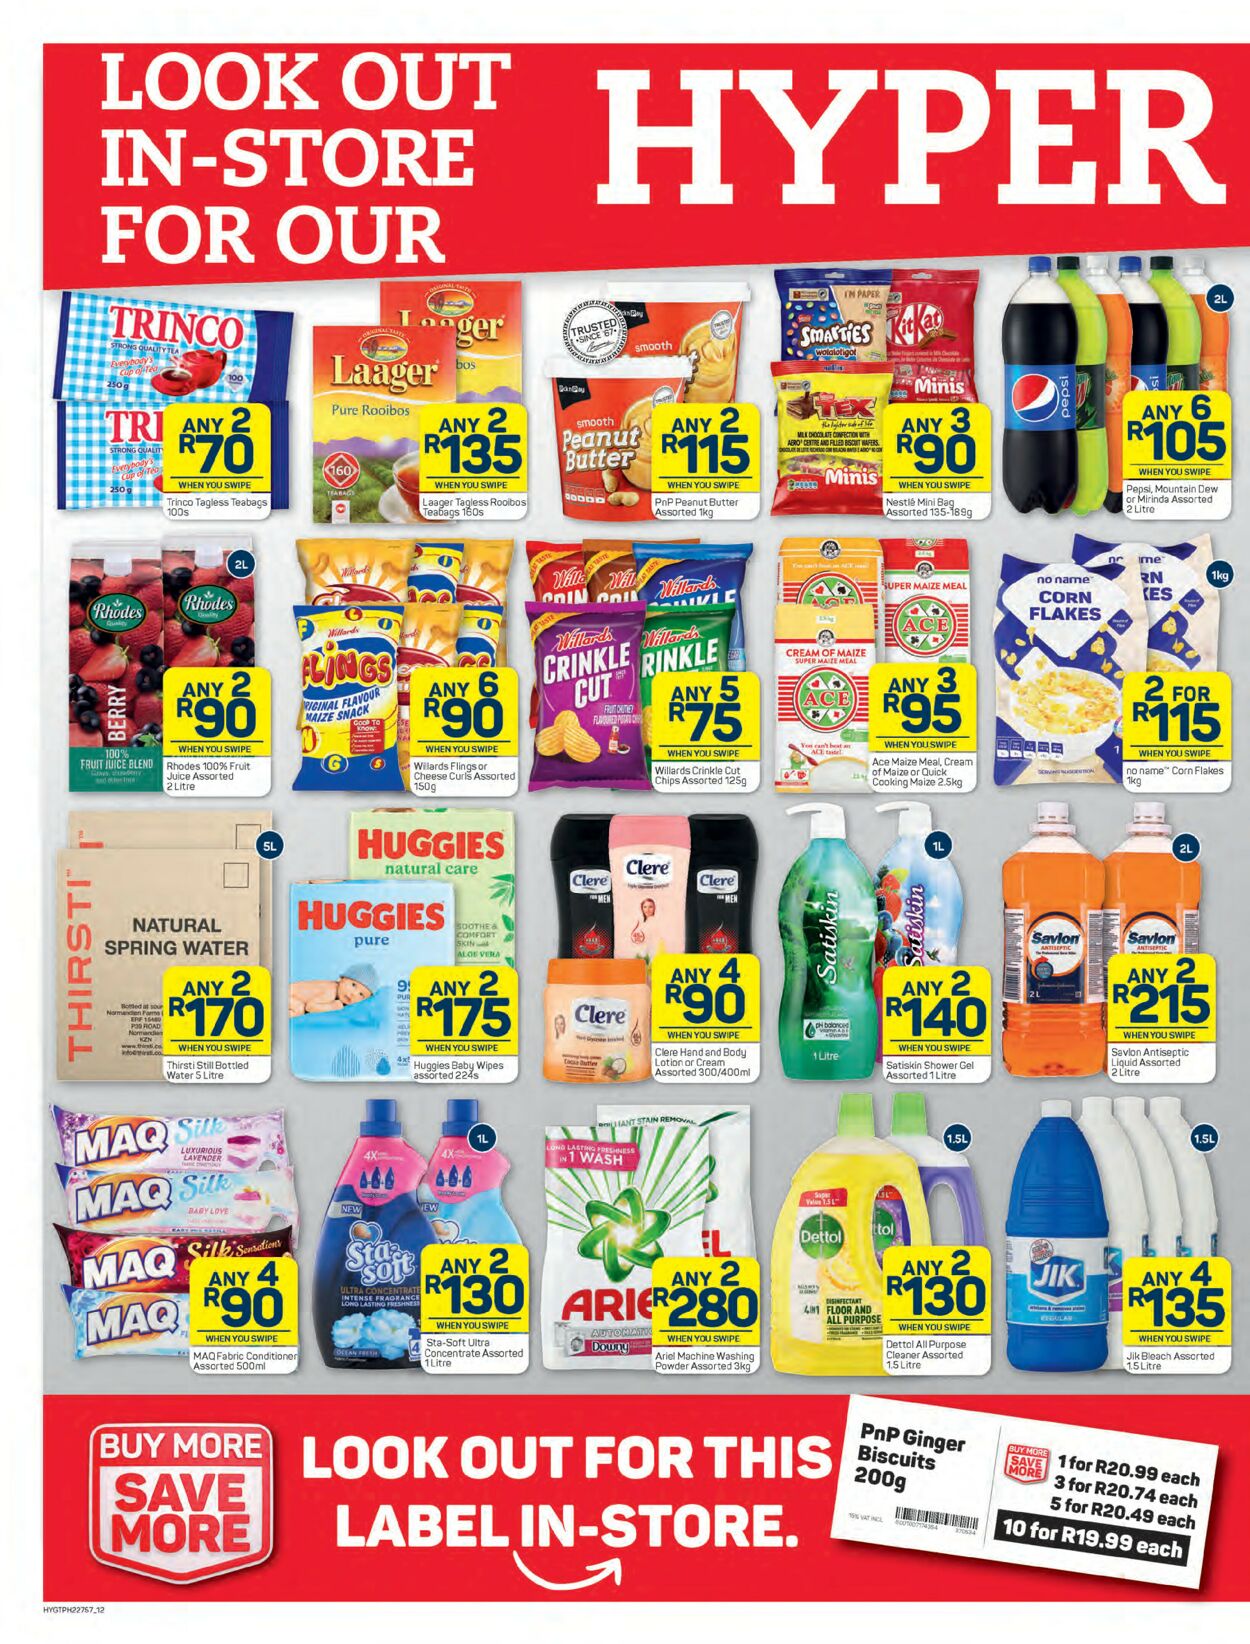 Pick n Pay Catalogue - 2023/04/24-2023/05/07 (Page 12)